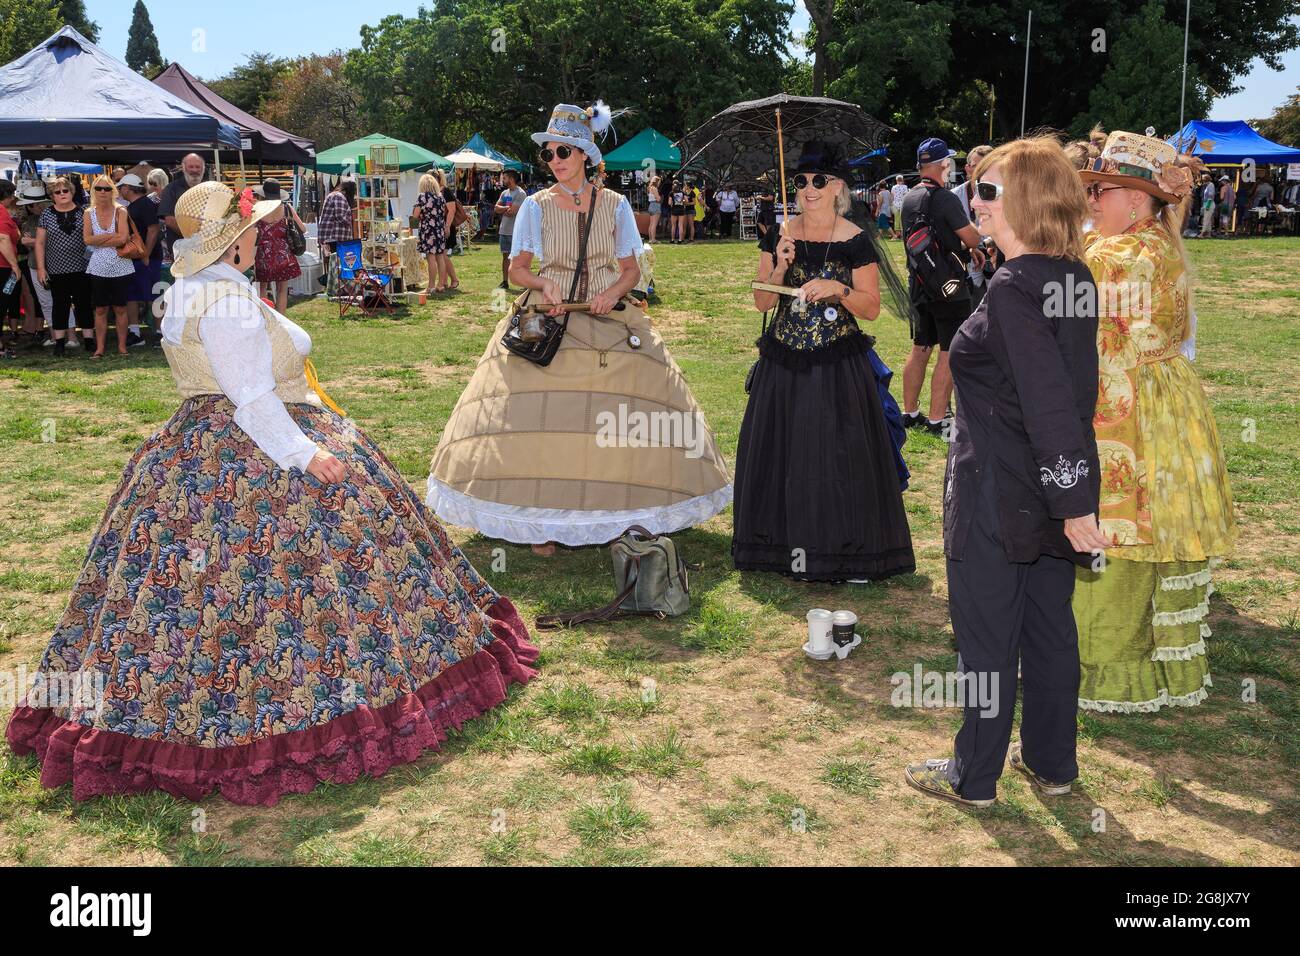 Women in costume at a retro and steampunk themed fair in Tauranga, New Zealand Stock Photo